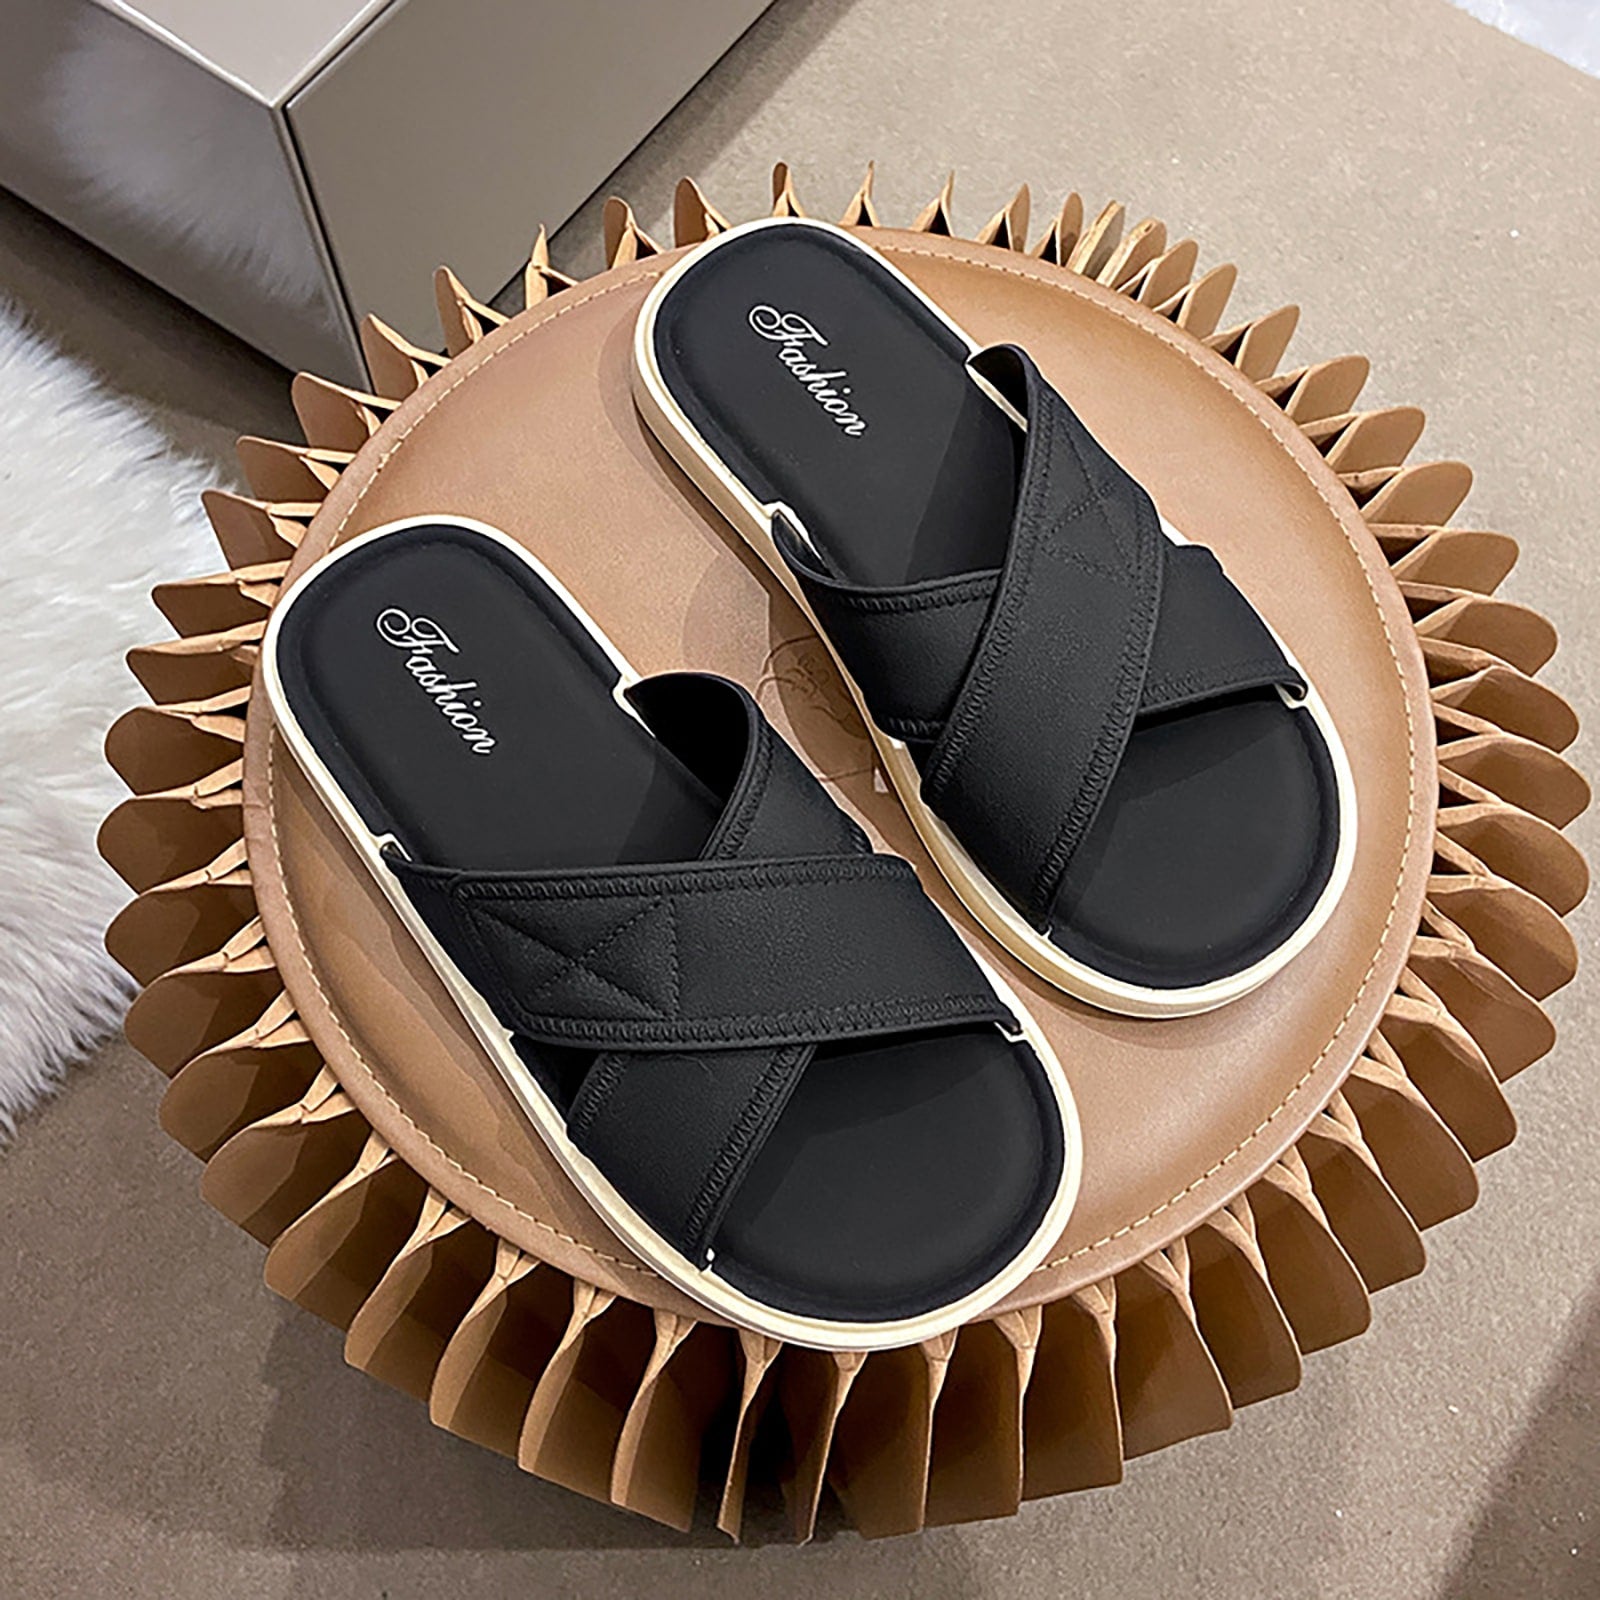 New Arrival Fashionable Simple Elegant Slippers For Home, Bathroom And Outdoor With Soft Pvc Slip-Resistant Bottom, Suitable For Indoor And Outdoor Wear, Fashion Style-Black-12